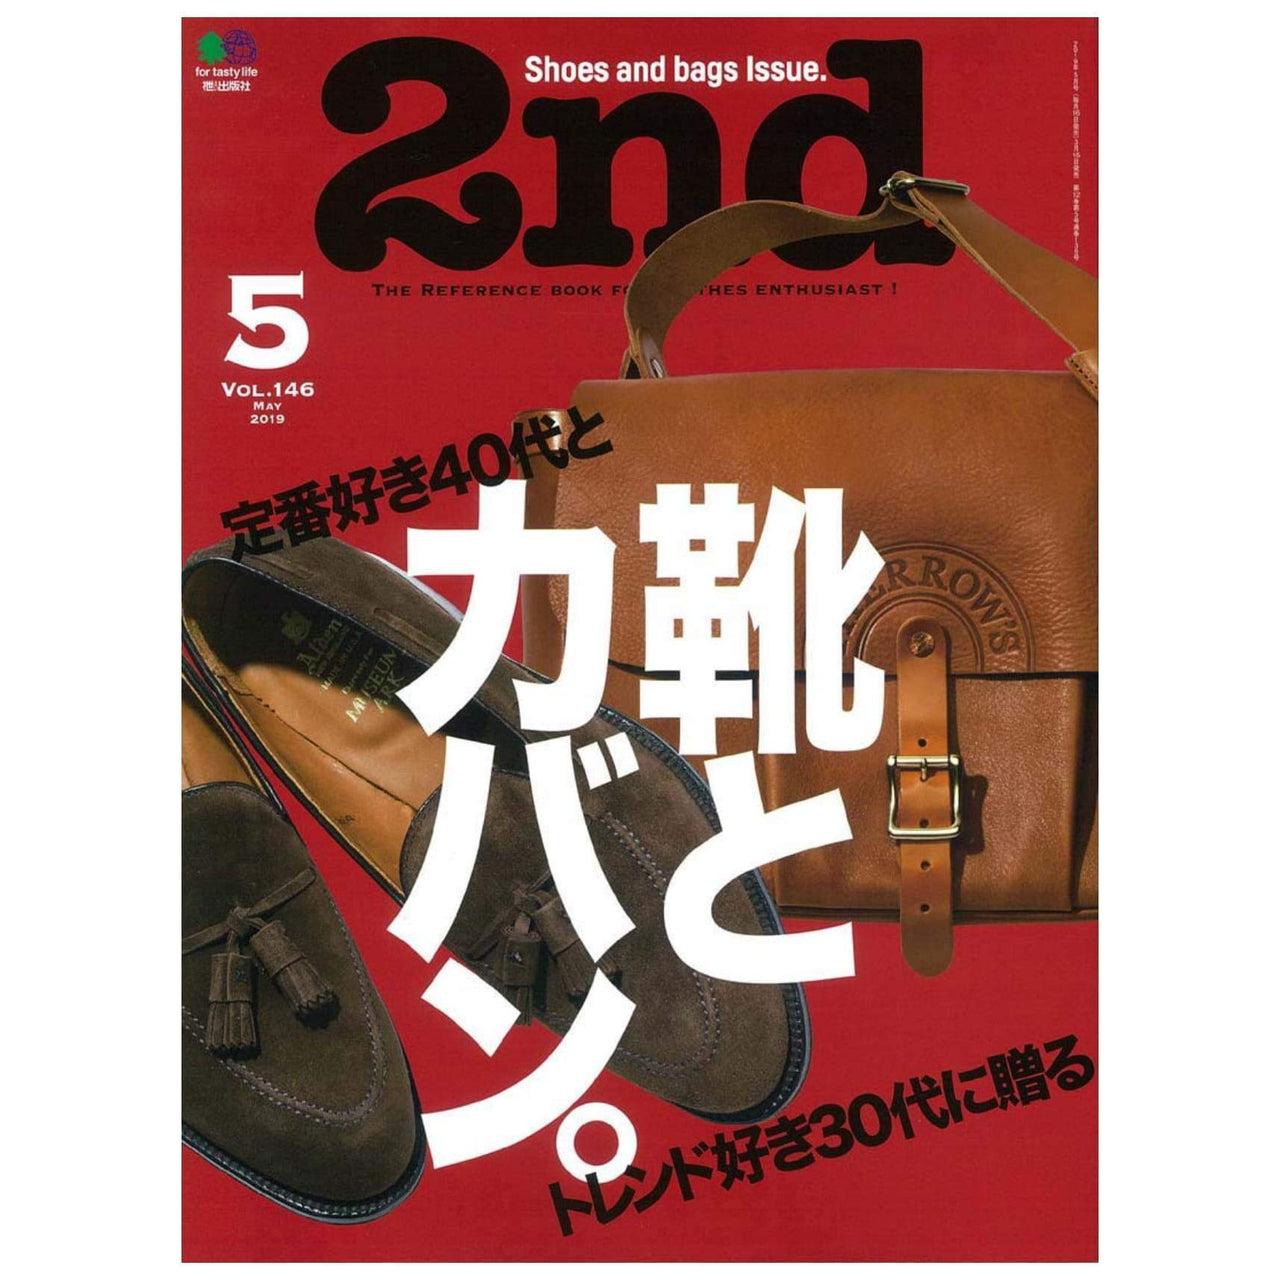 2nd Vol.146 "Shoes & Bags"-Magazine-Clutch Cafe